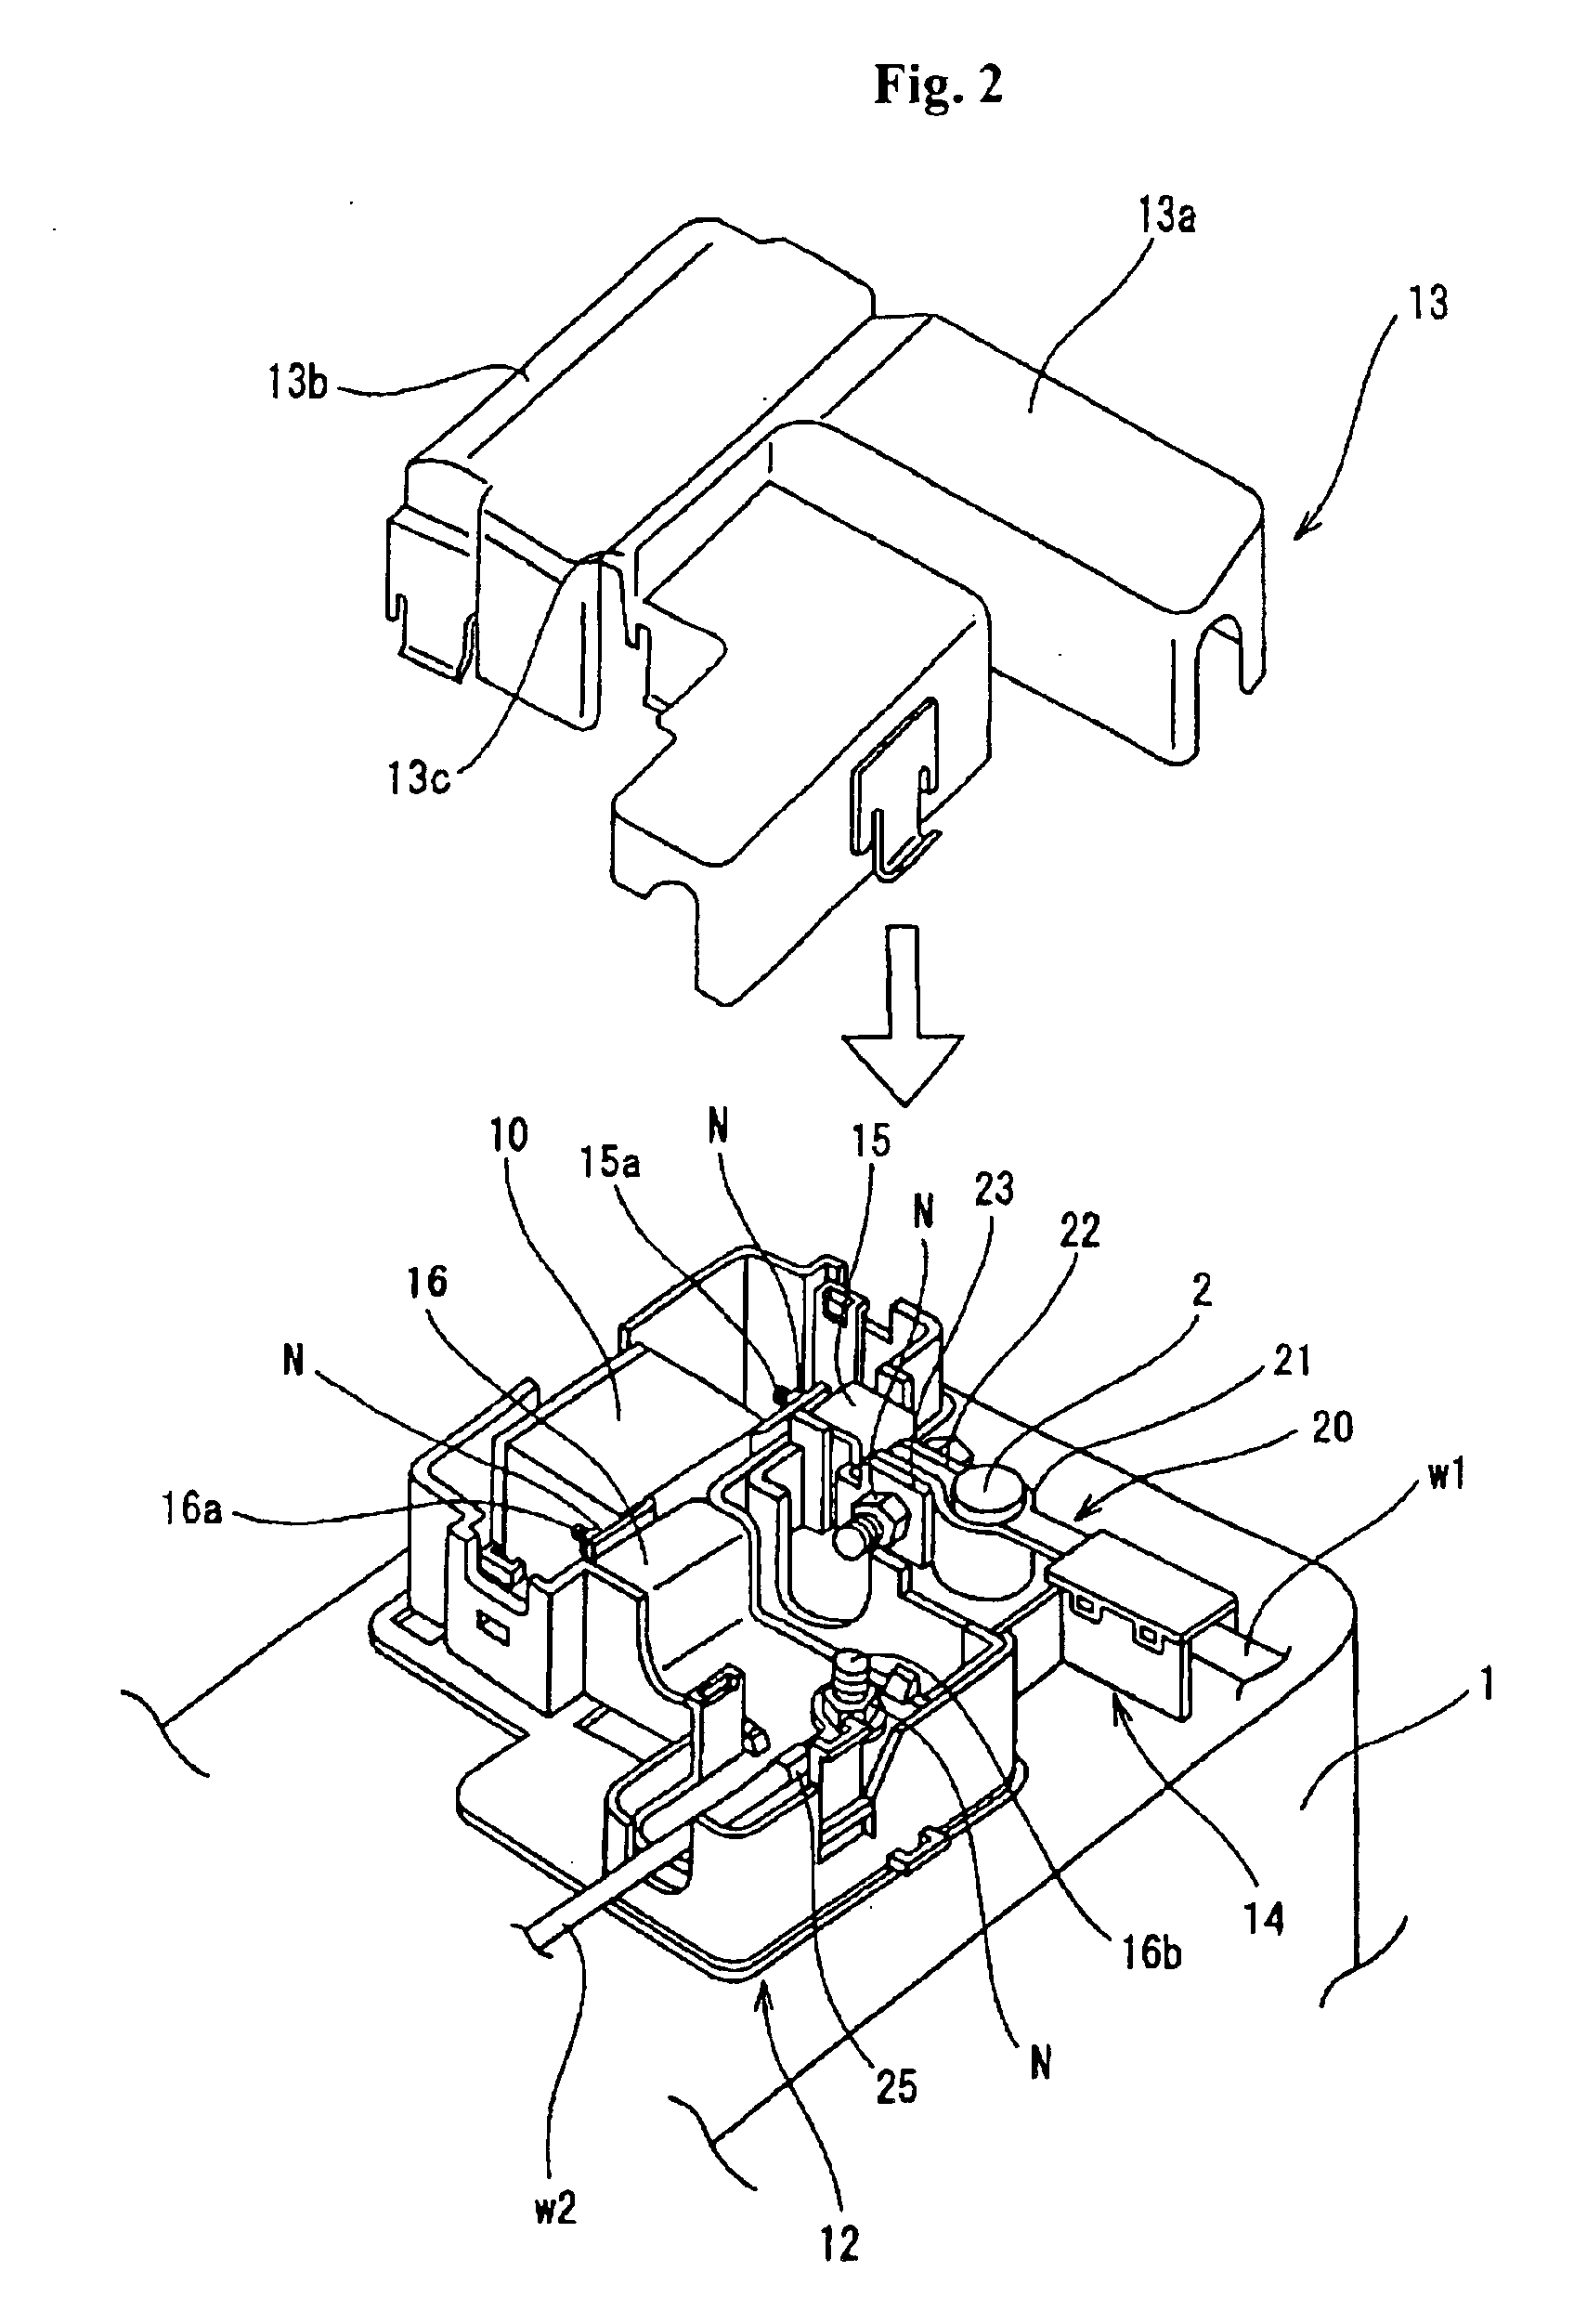 Battery fuse-containing box